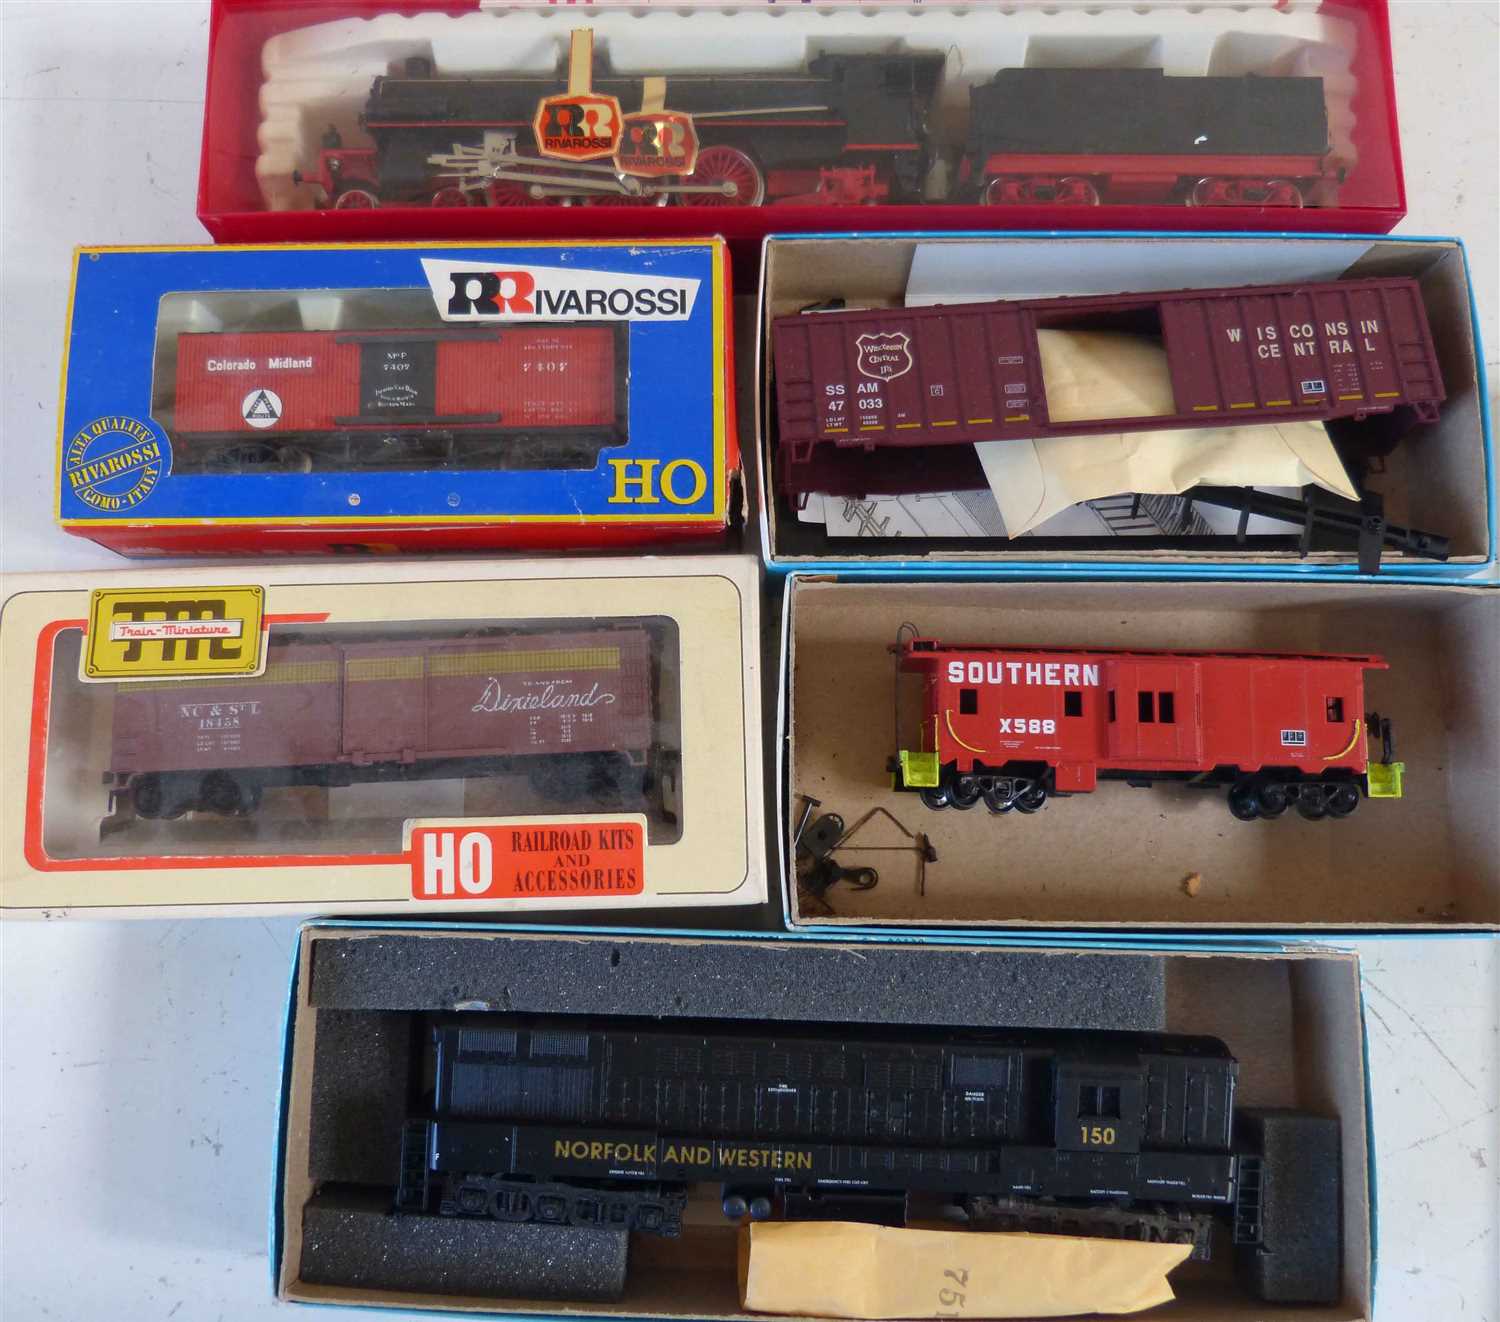 Lot 183 - Boxed Rivarossi locomotive GR-691-022, Missouri Old Time box car, H O Woodsheathed box car, Athearn Train Trainmaster bay window caboose and Wisconsin central railbox